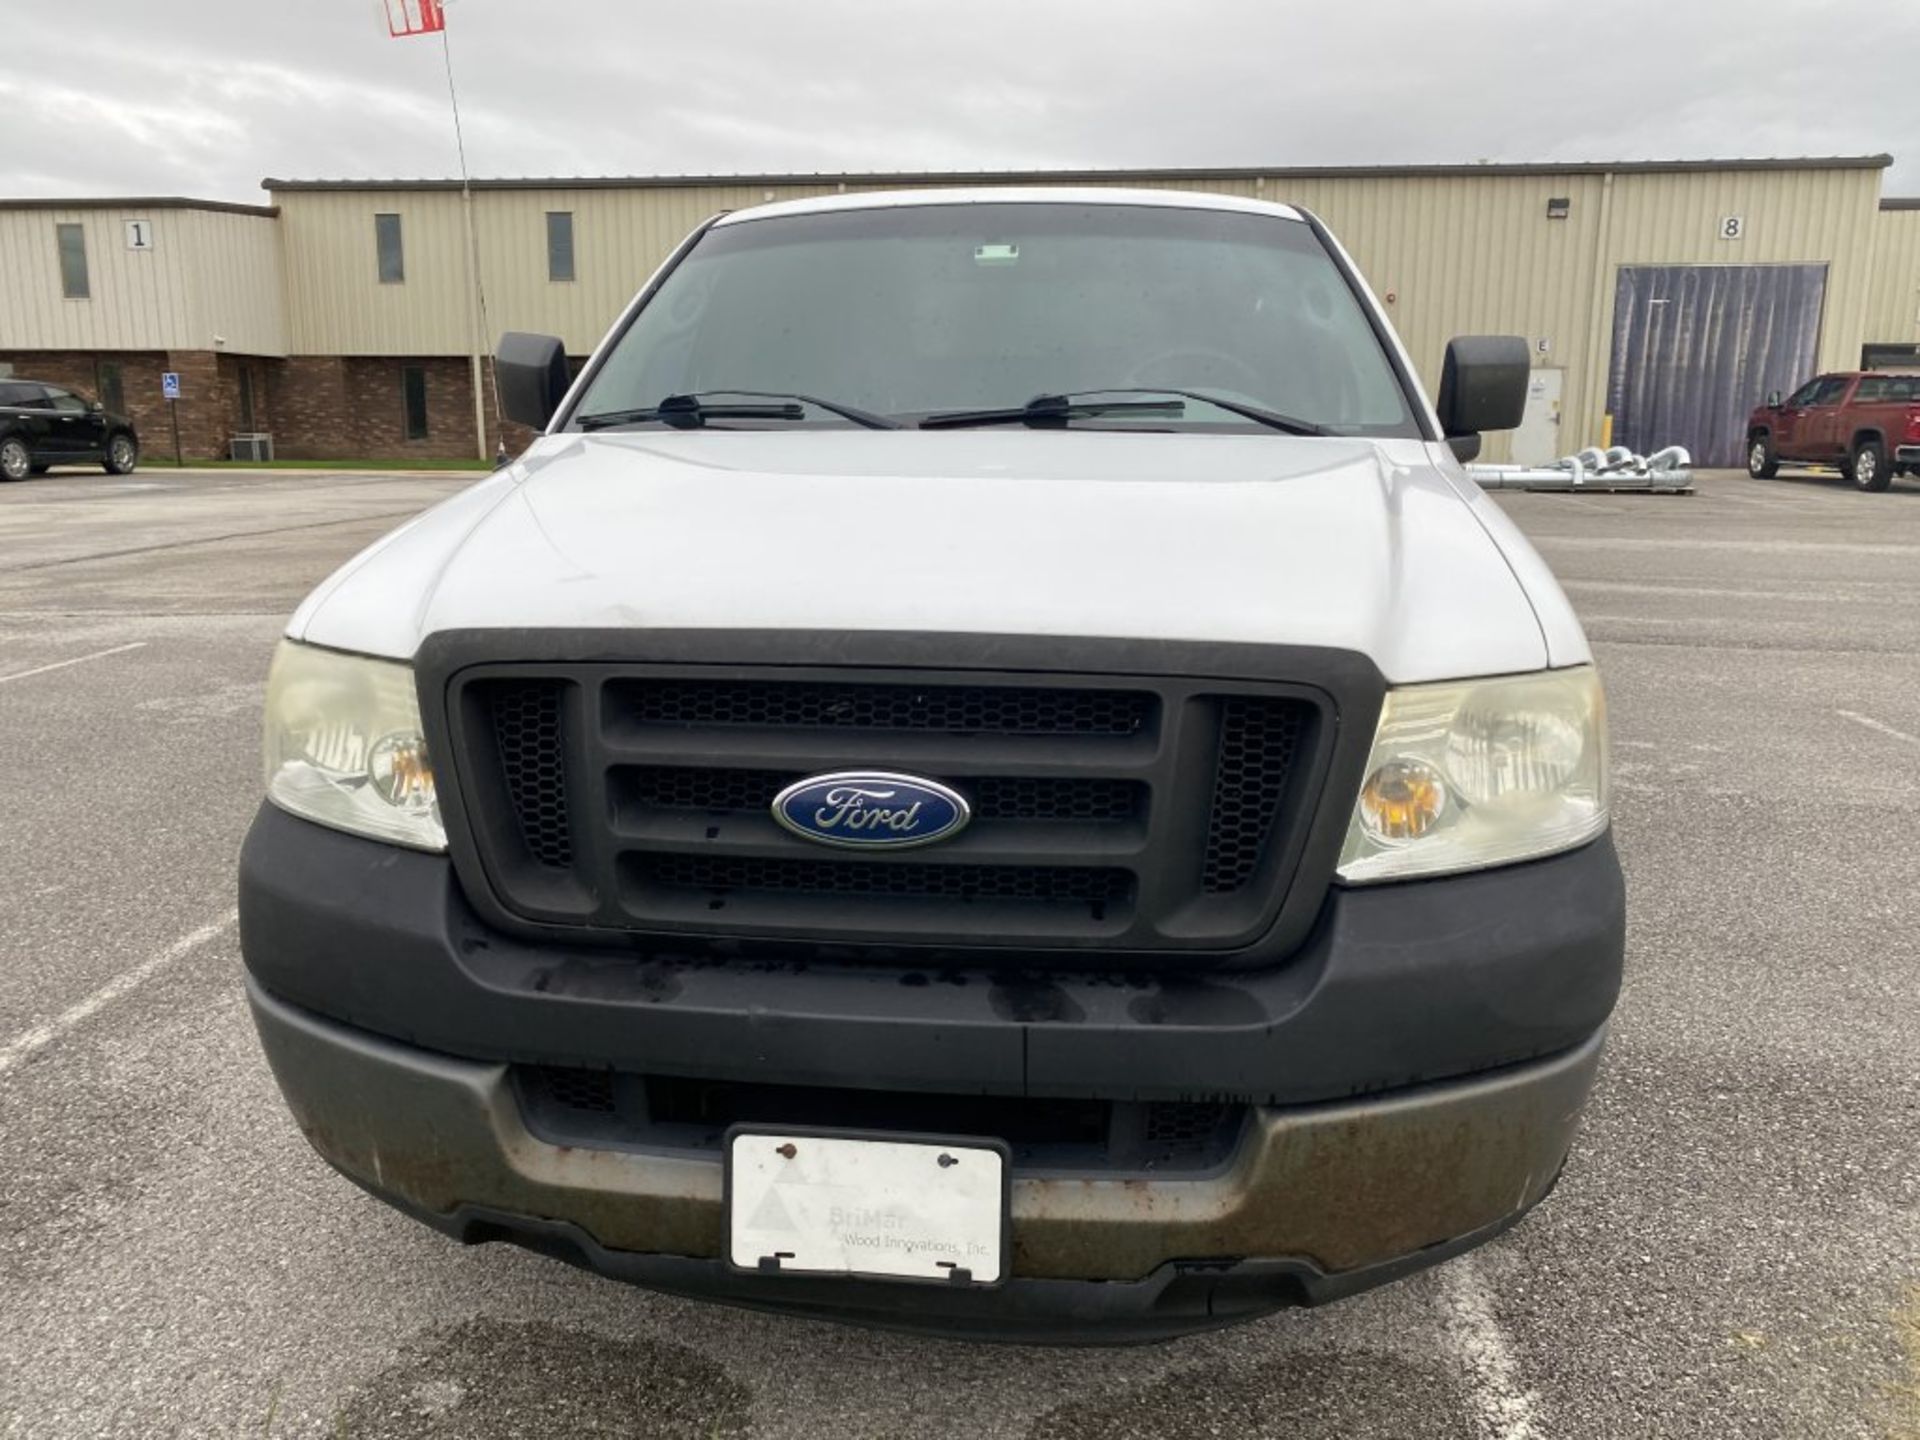 2005 FORD F150 XLT PICKUP TRUCK, EXTENDED CAB, LONG BOX WITH TOPPER, 2WD, AUTO TRANS, AM/FM-CD, - Image 8 of 22